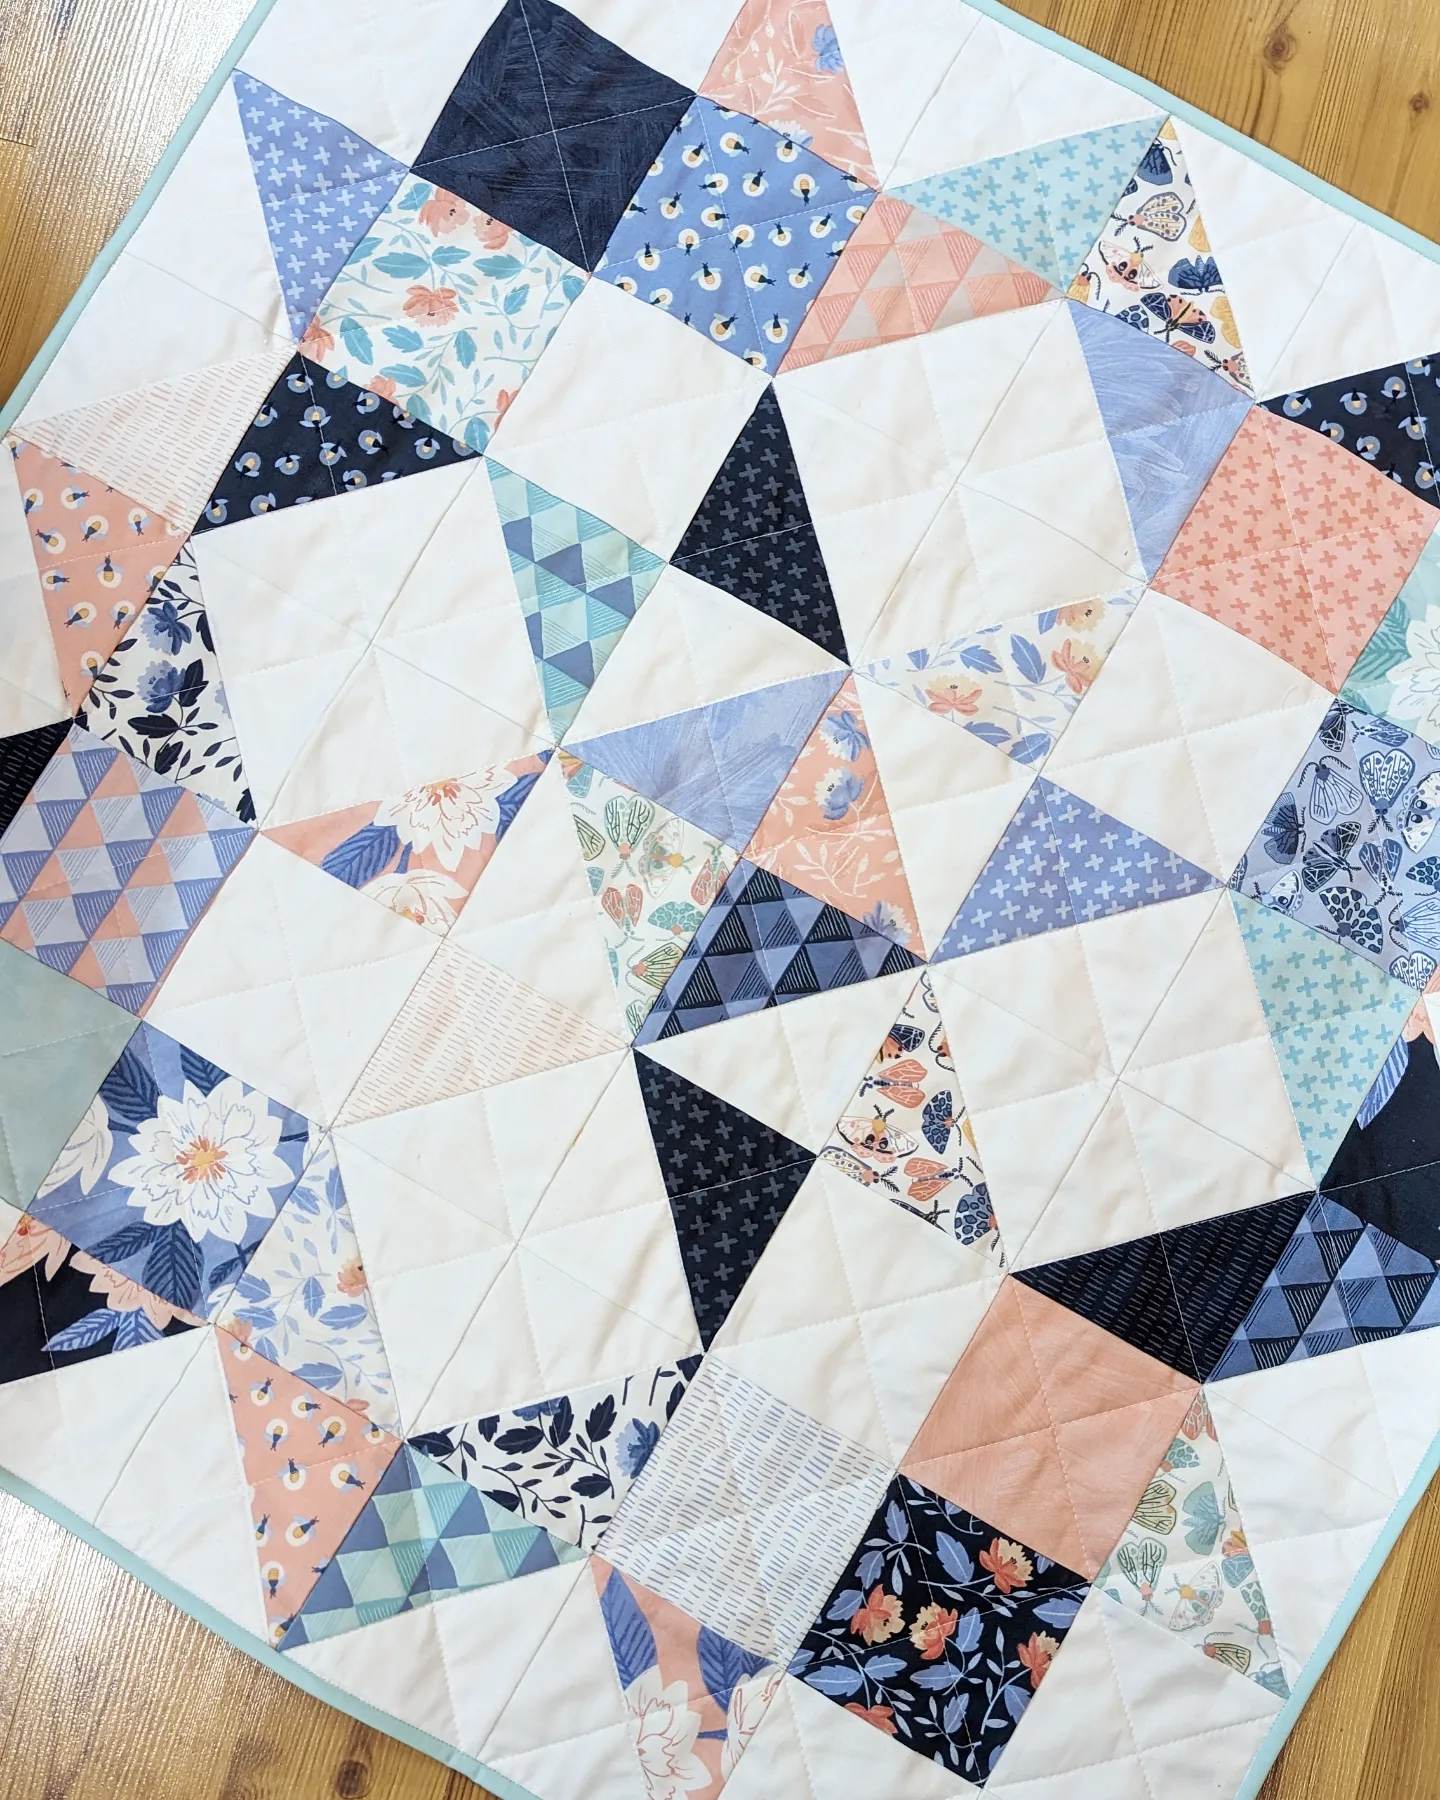 How To Make A Design Wall Quilt For Laying Out Your Quilts 